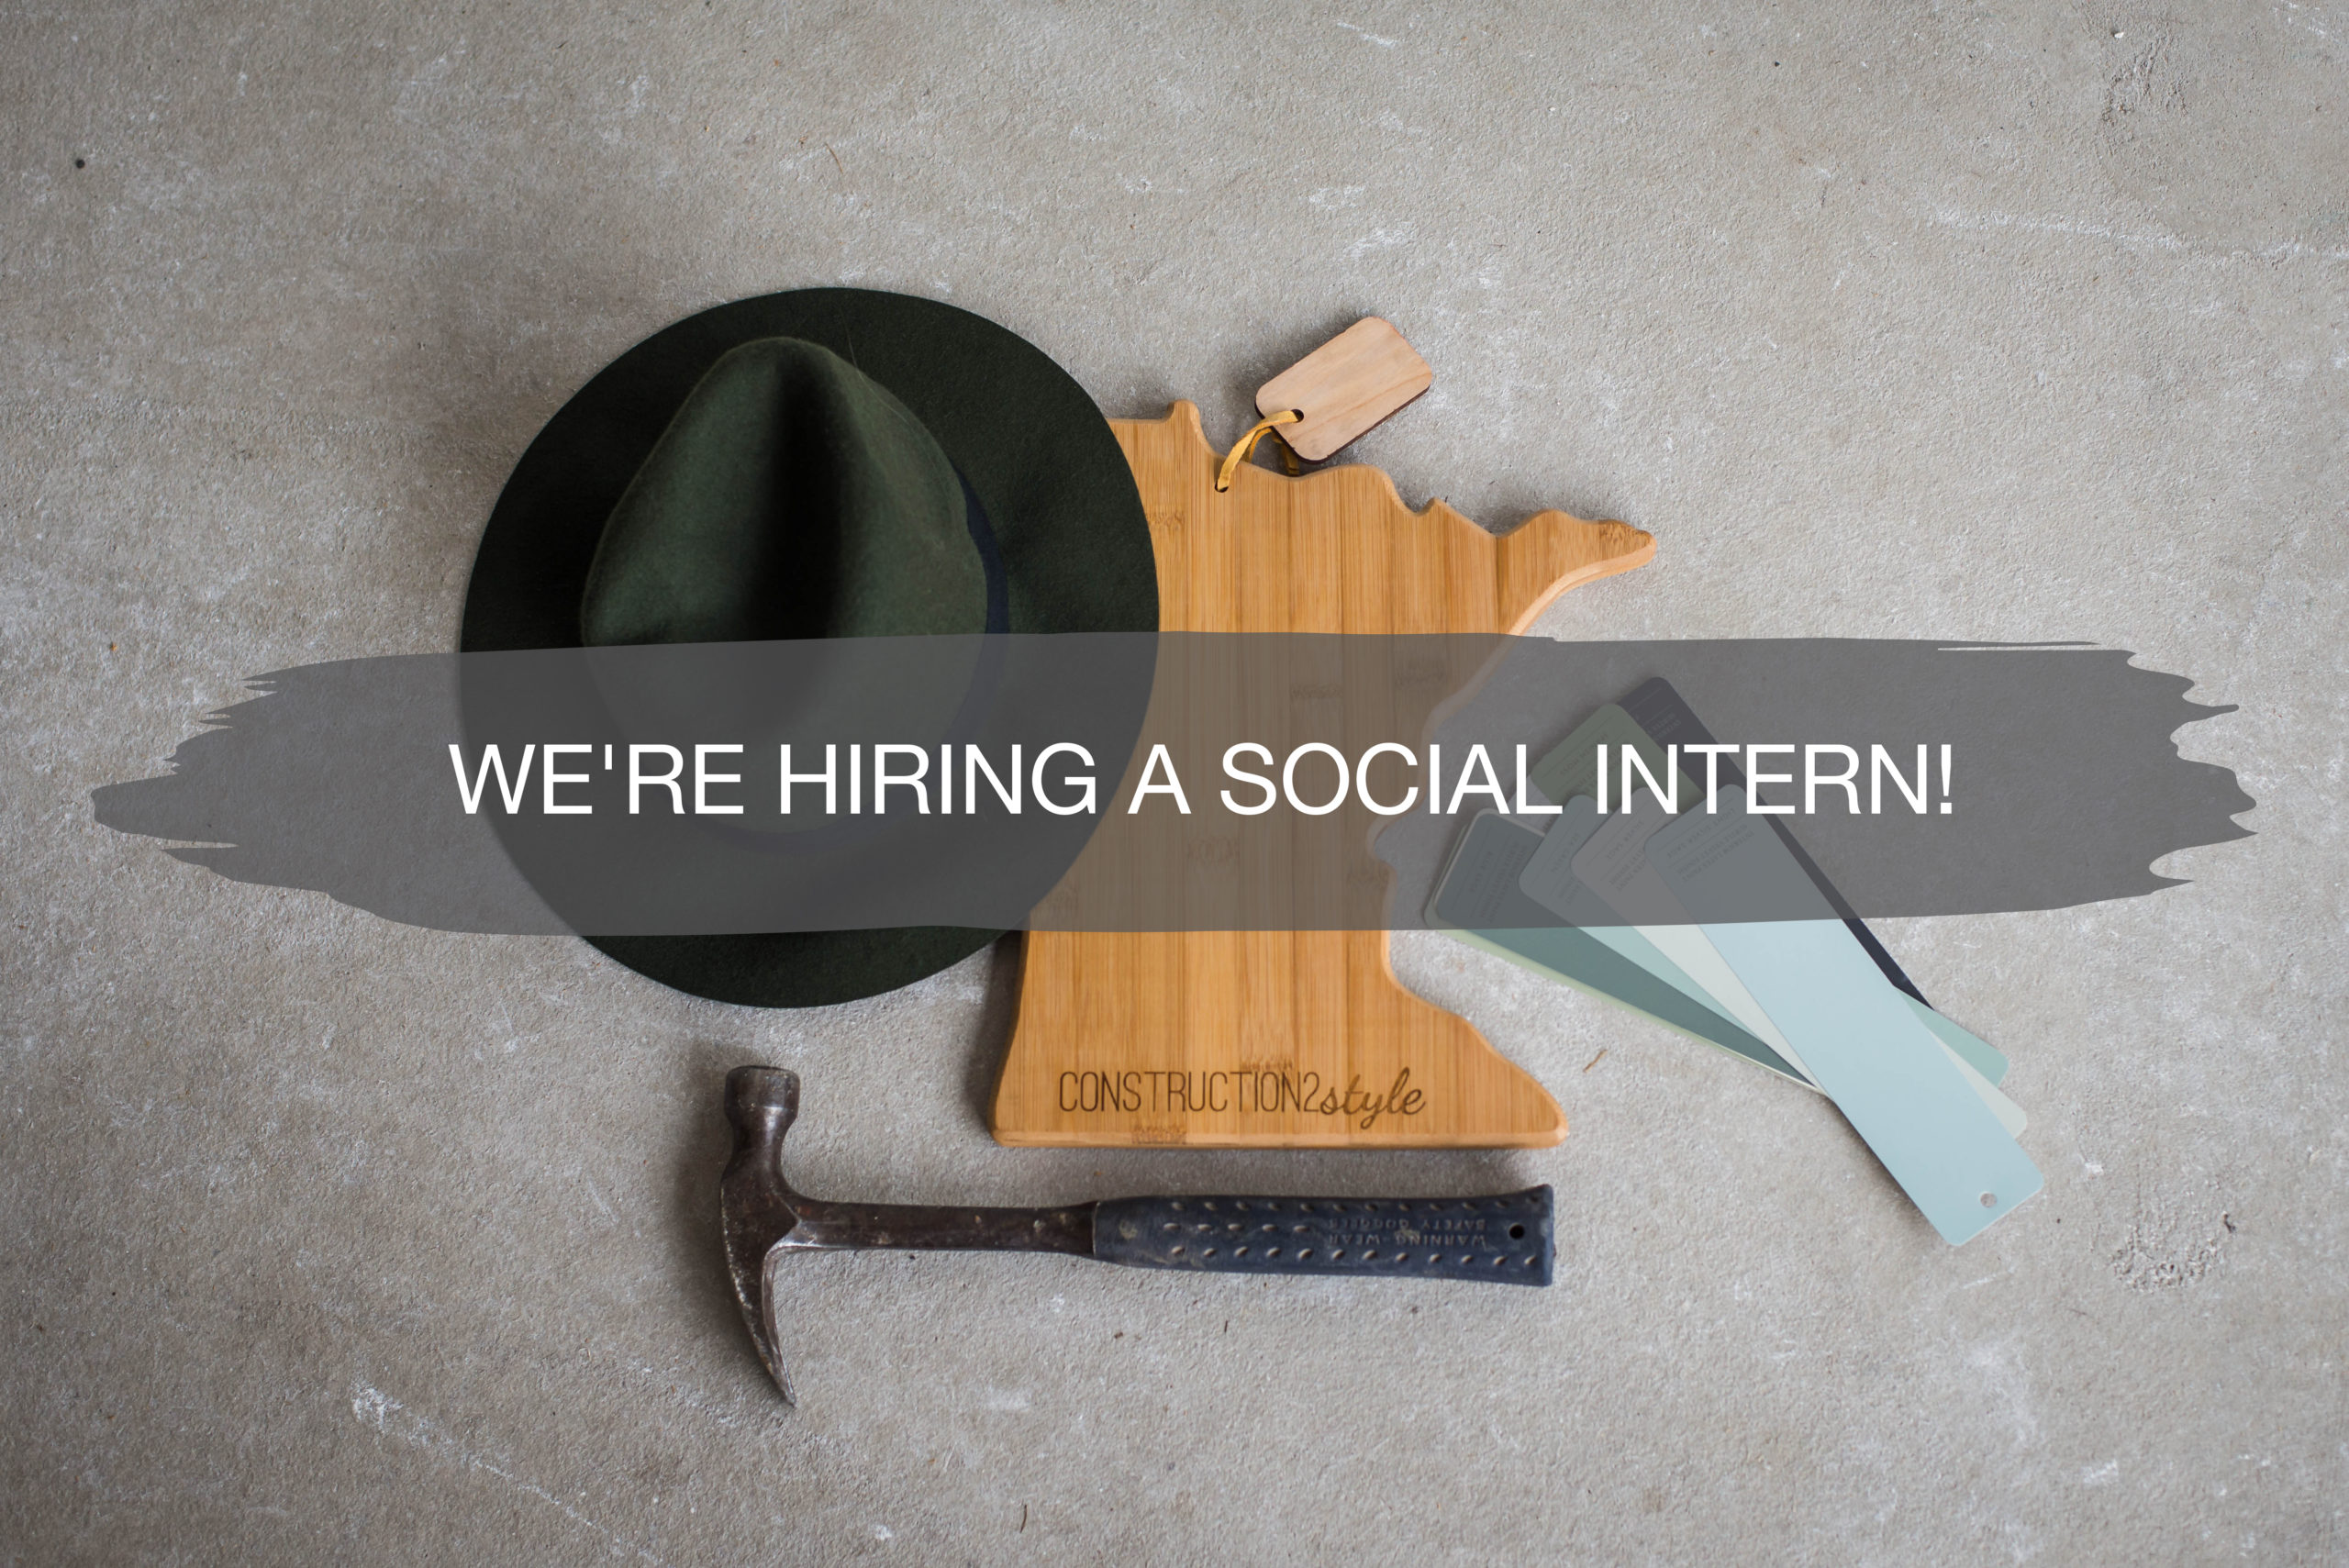 Social Media Intern Elk River, MN | home improvement resource blog, interior residential remodeling company hiring | construction2style